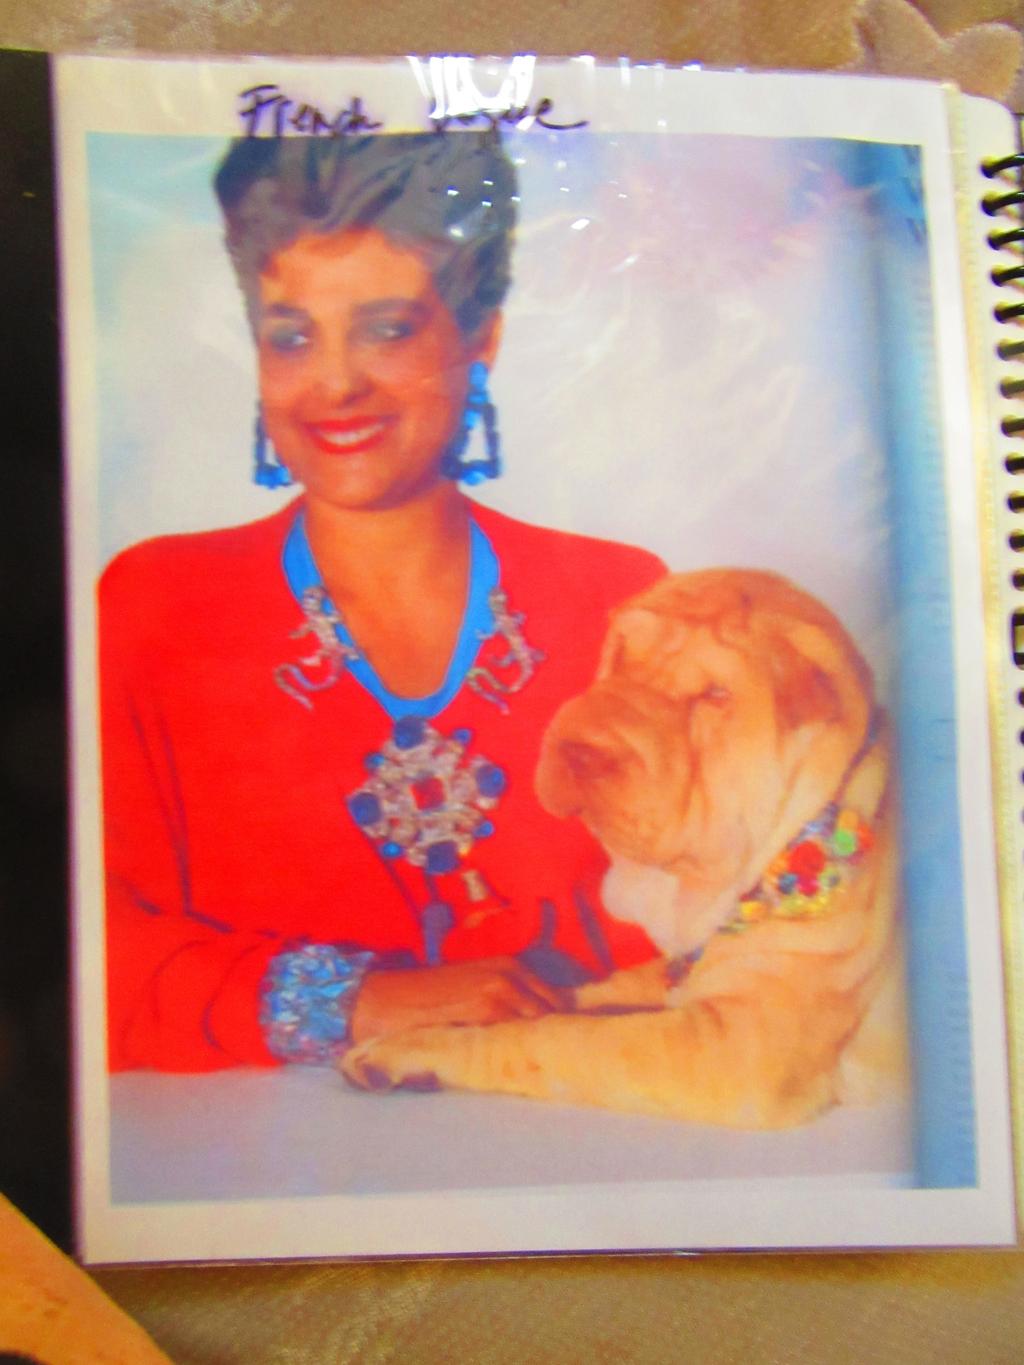 !5 Gell/ Behind the Rhinestones WORKING TITLE/The Vogue Closet! My dog Zircon and I in Paris Vogue. I had a big fan of Liz in publicity at Warner Brothers.